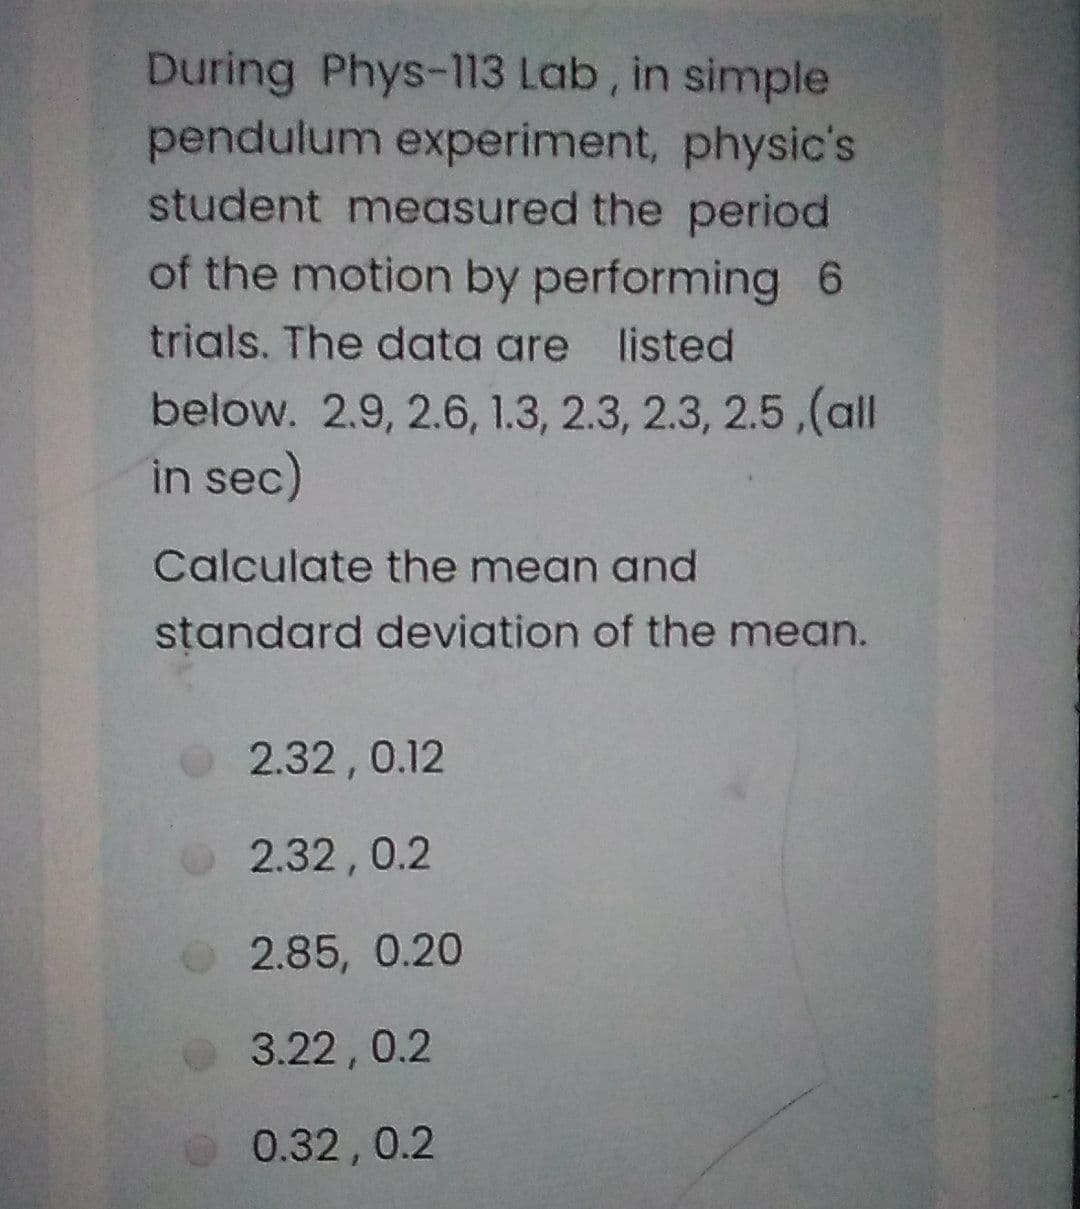 During Phys-113 Lab, in simple
pendulum experiment, physic's
student measured the period
of the motion by performing 6
trials. The data are listed
below. 2.9, 2.6, 1.3, 2.3, 2.3, 2.5,(all
in sec)
Calculate the mean and
standard deviation of the mean.
2.32, 0.12
2.32,0.2
2.85, 0.20
3.22,0.2
0.32,0.2
